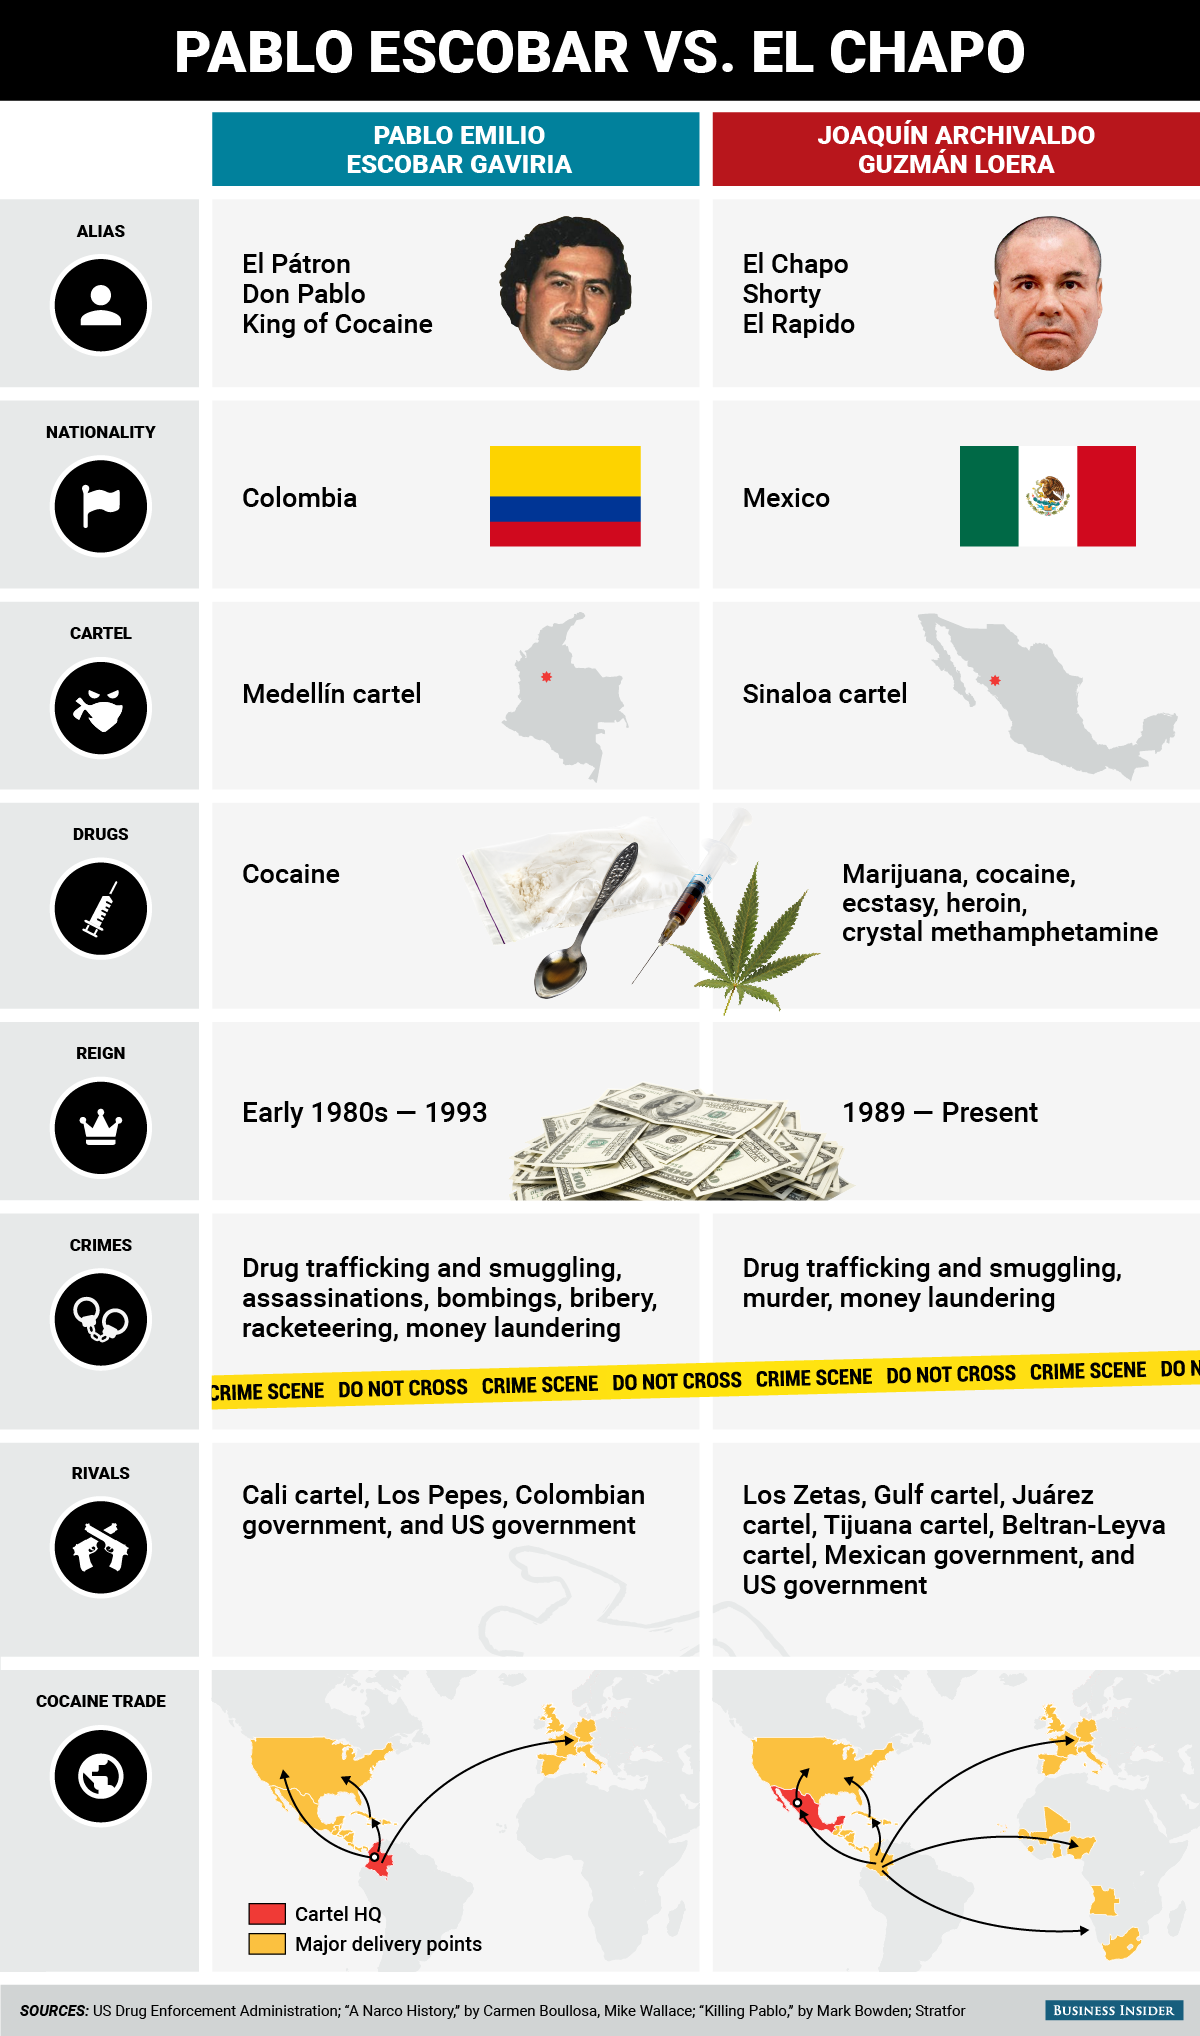 Pablo Escobar & 'El Chapo' Guzmán: How 2 of the world's most powerful